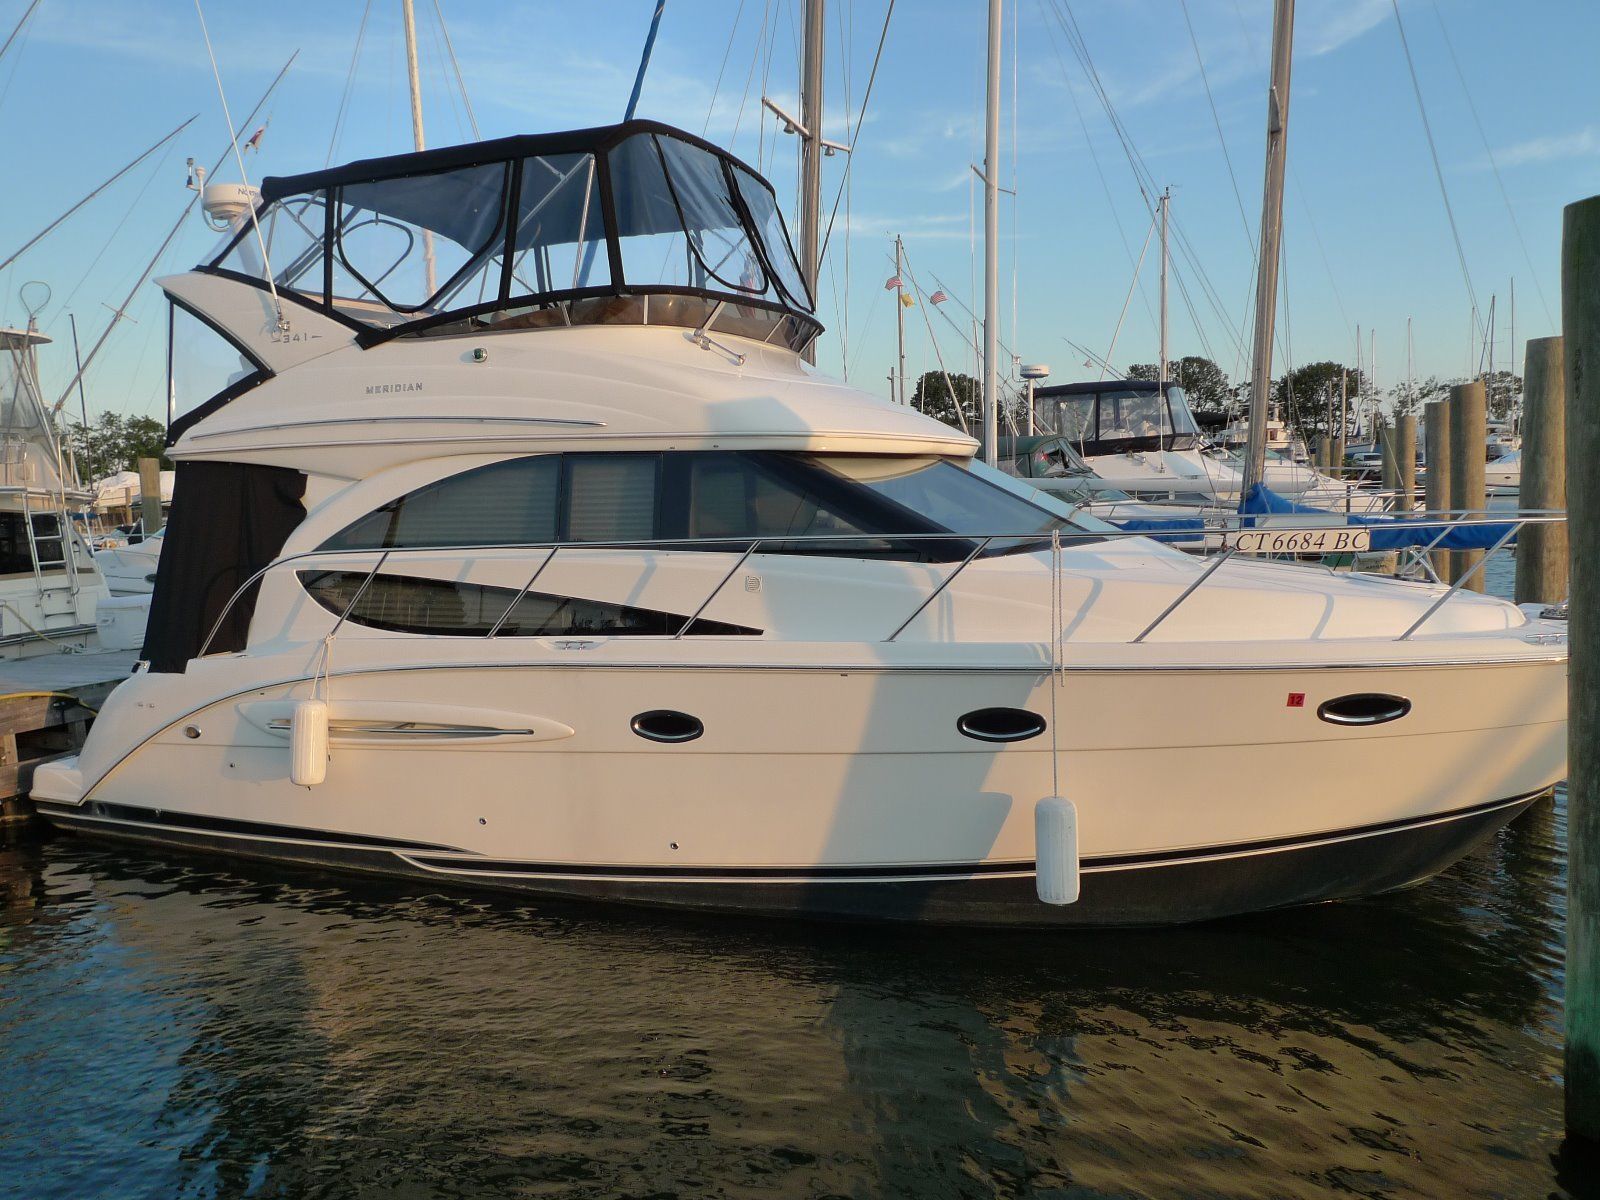 Meridian 341 2007 for sale for $145,500 - Boats-from-USA.com